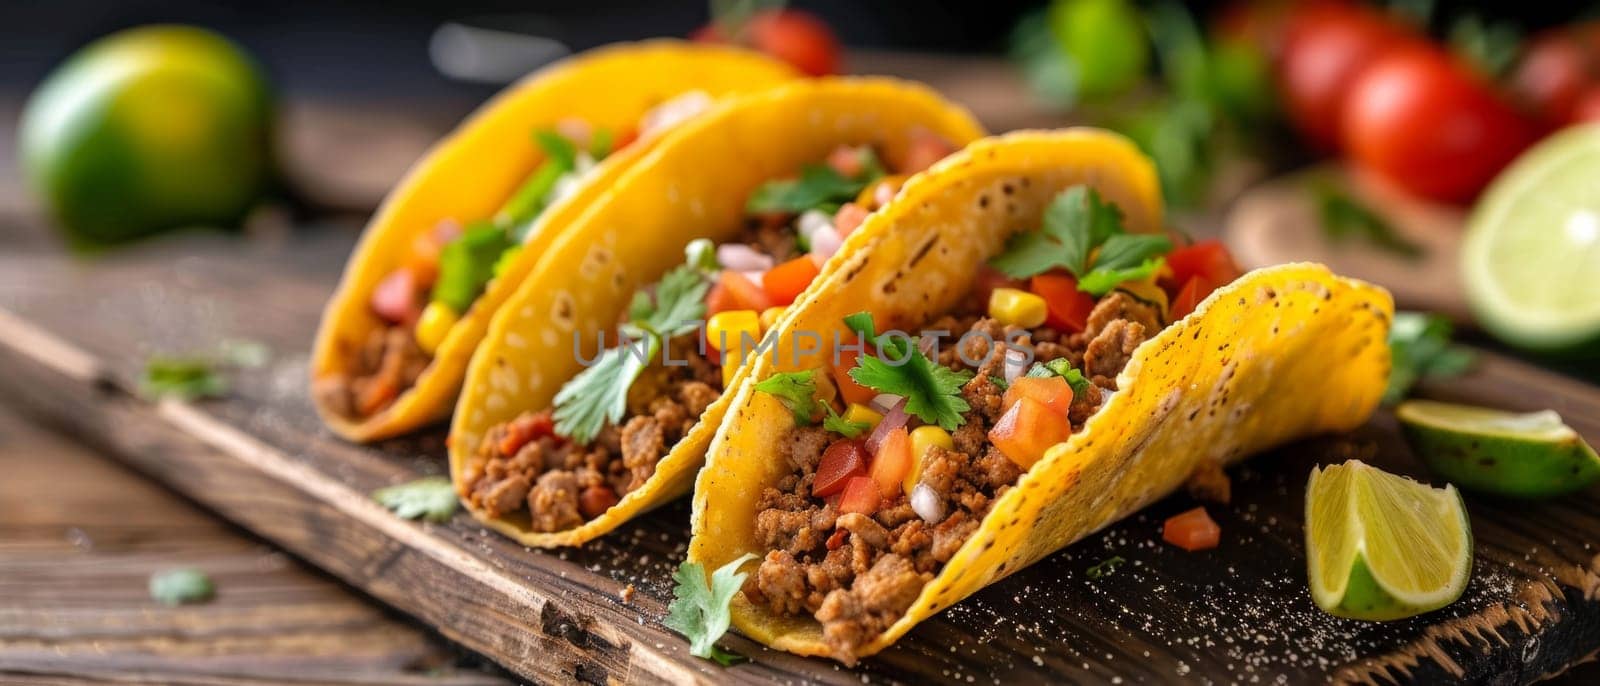 A row of crunchy ground beef tacos garnished with fresh parsley, lime wedges, and a dusting of spices on a wooden board. by sfinks